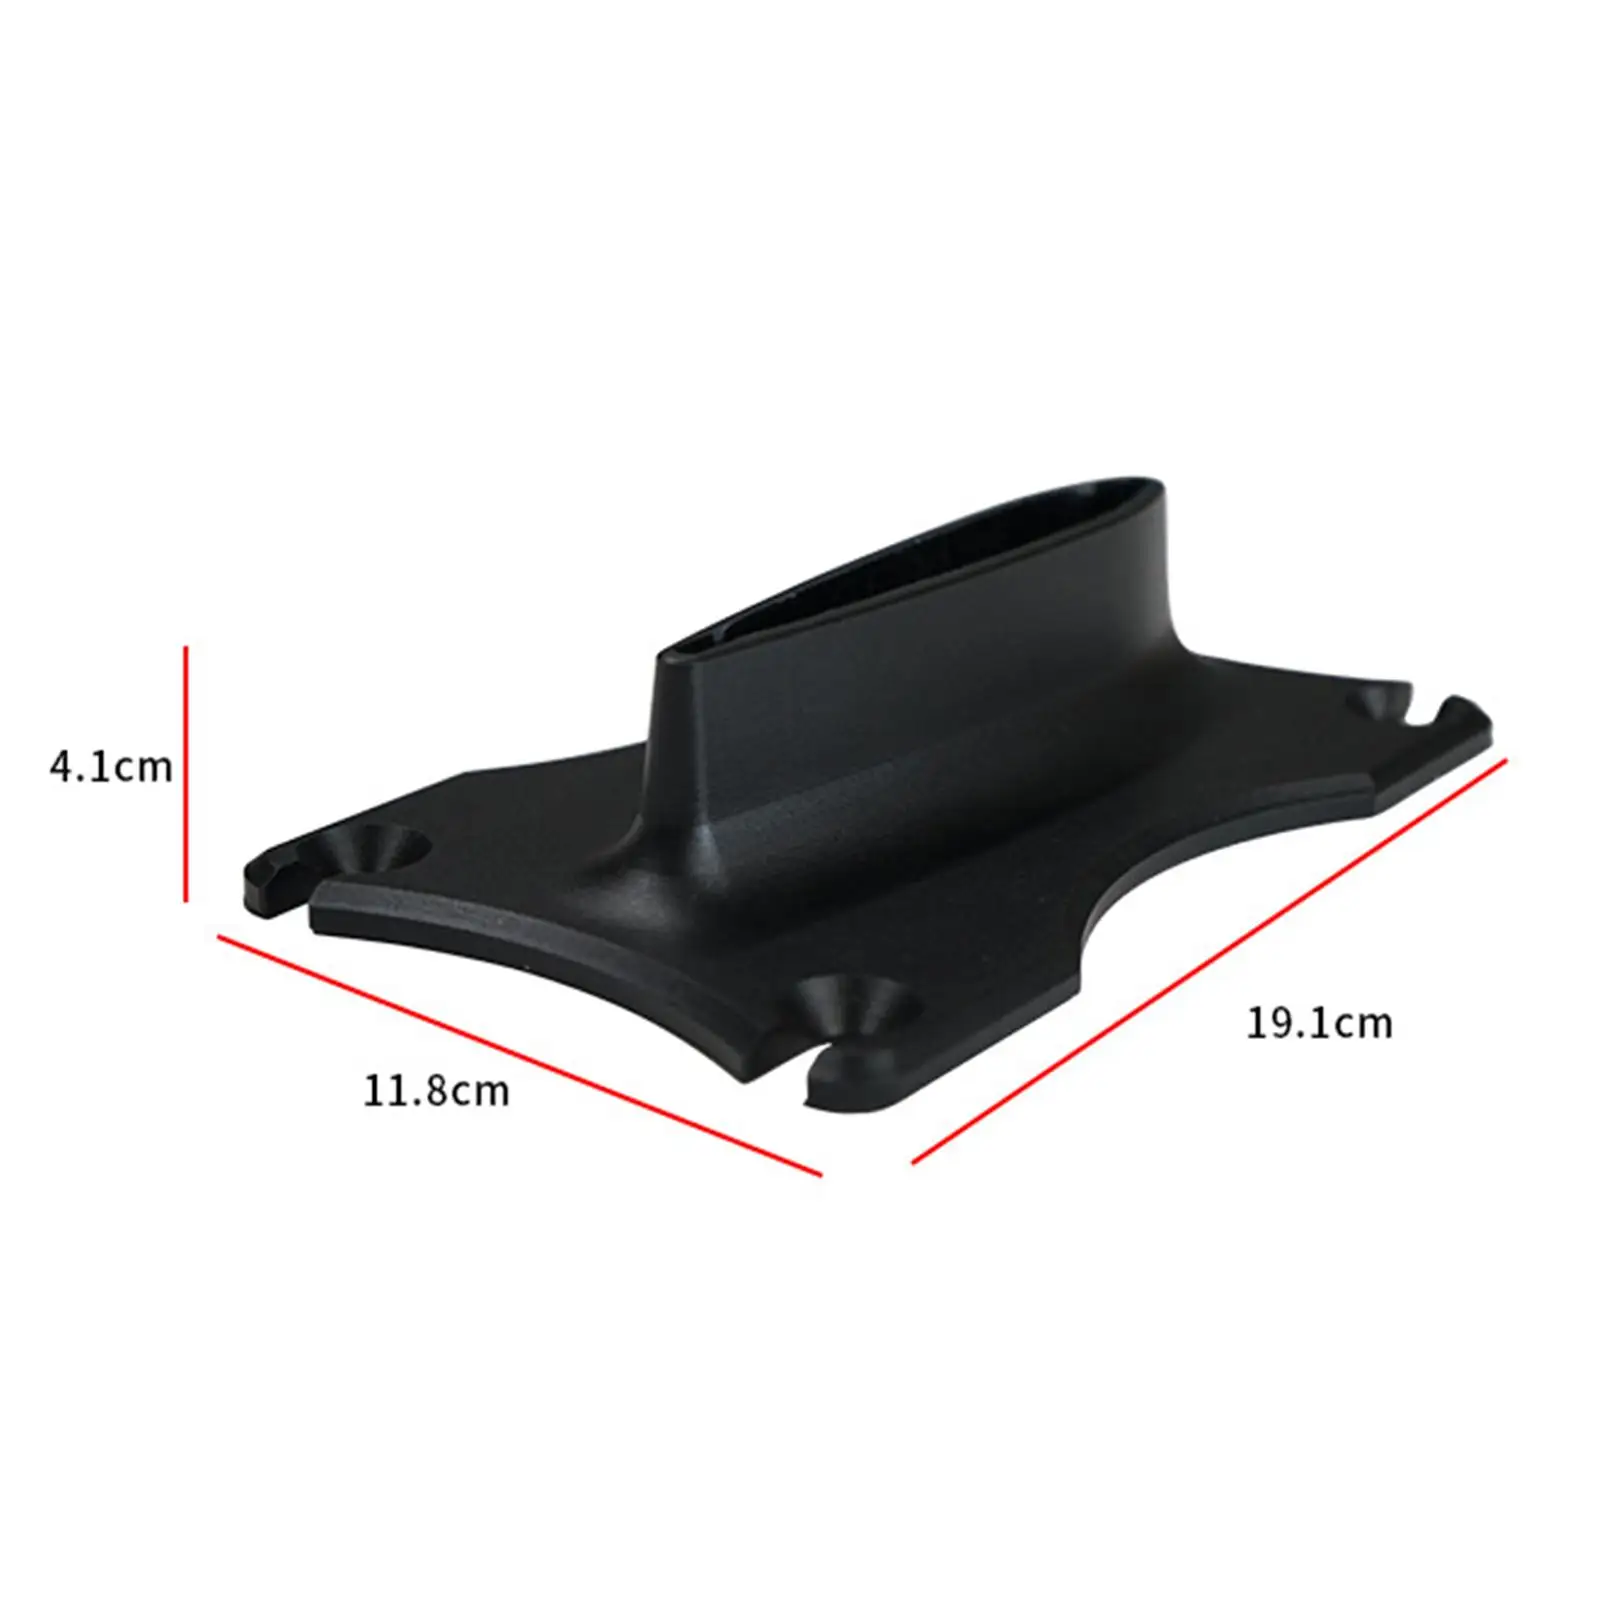 Surfboard Hydrofoil Base, Improves Stability, Replacement Surfboard Kit for